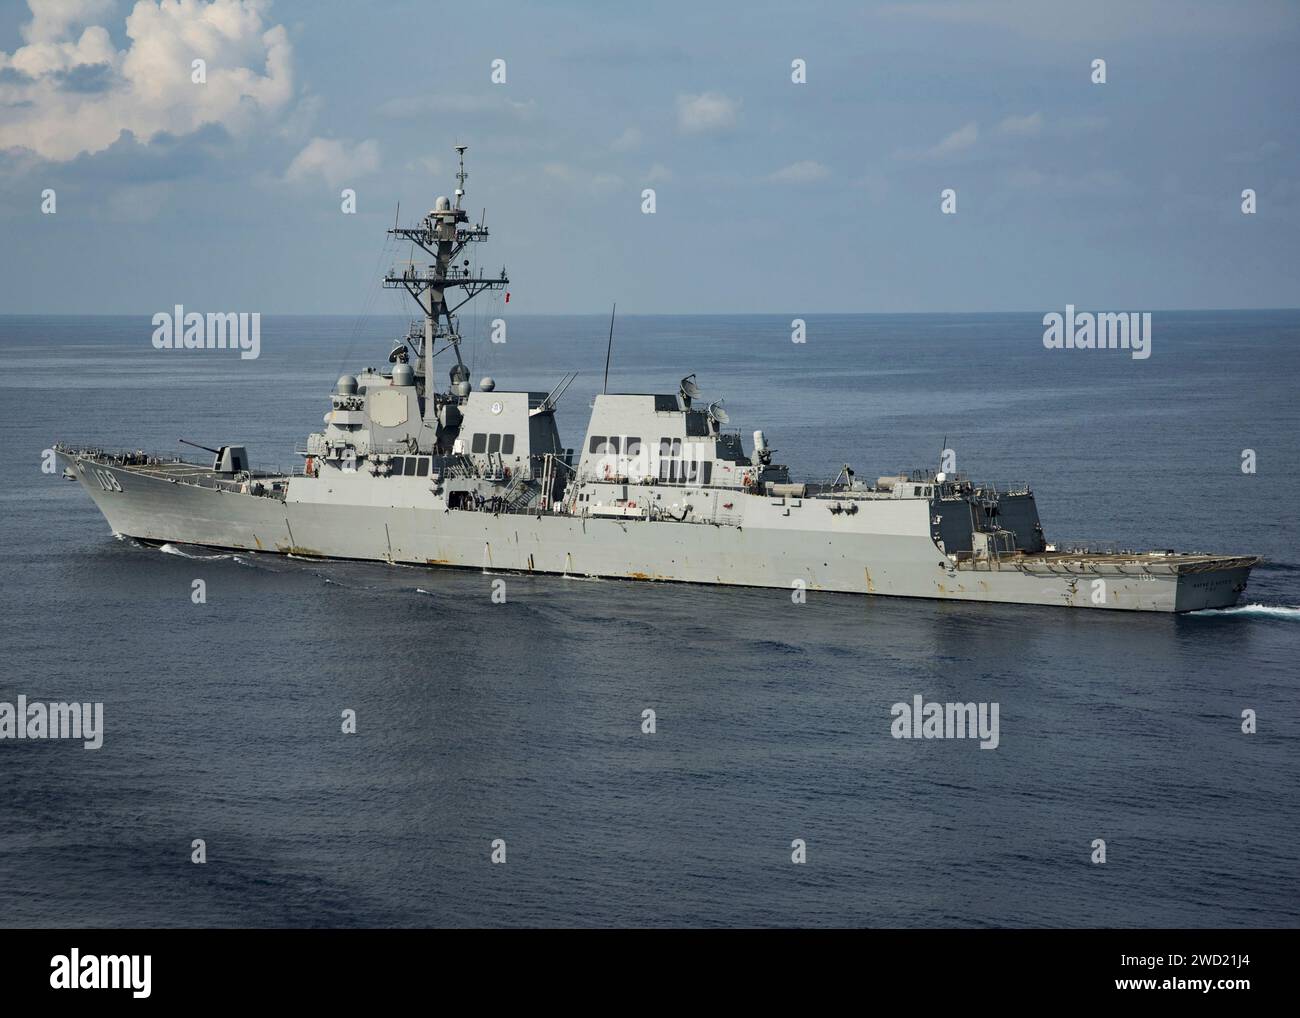 USS Wayne E. Meyer guided missile destroyer of the U.S. Navy. Stock Photo